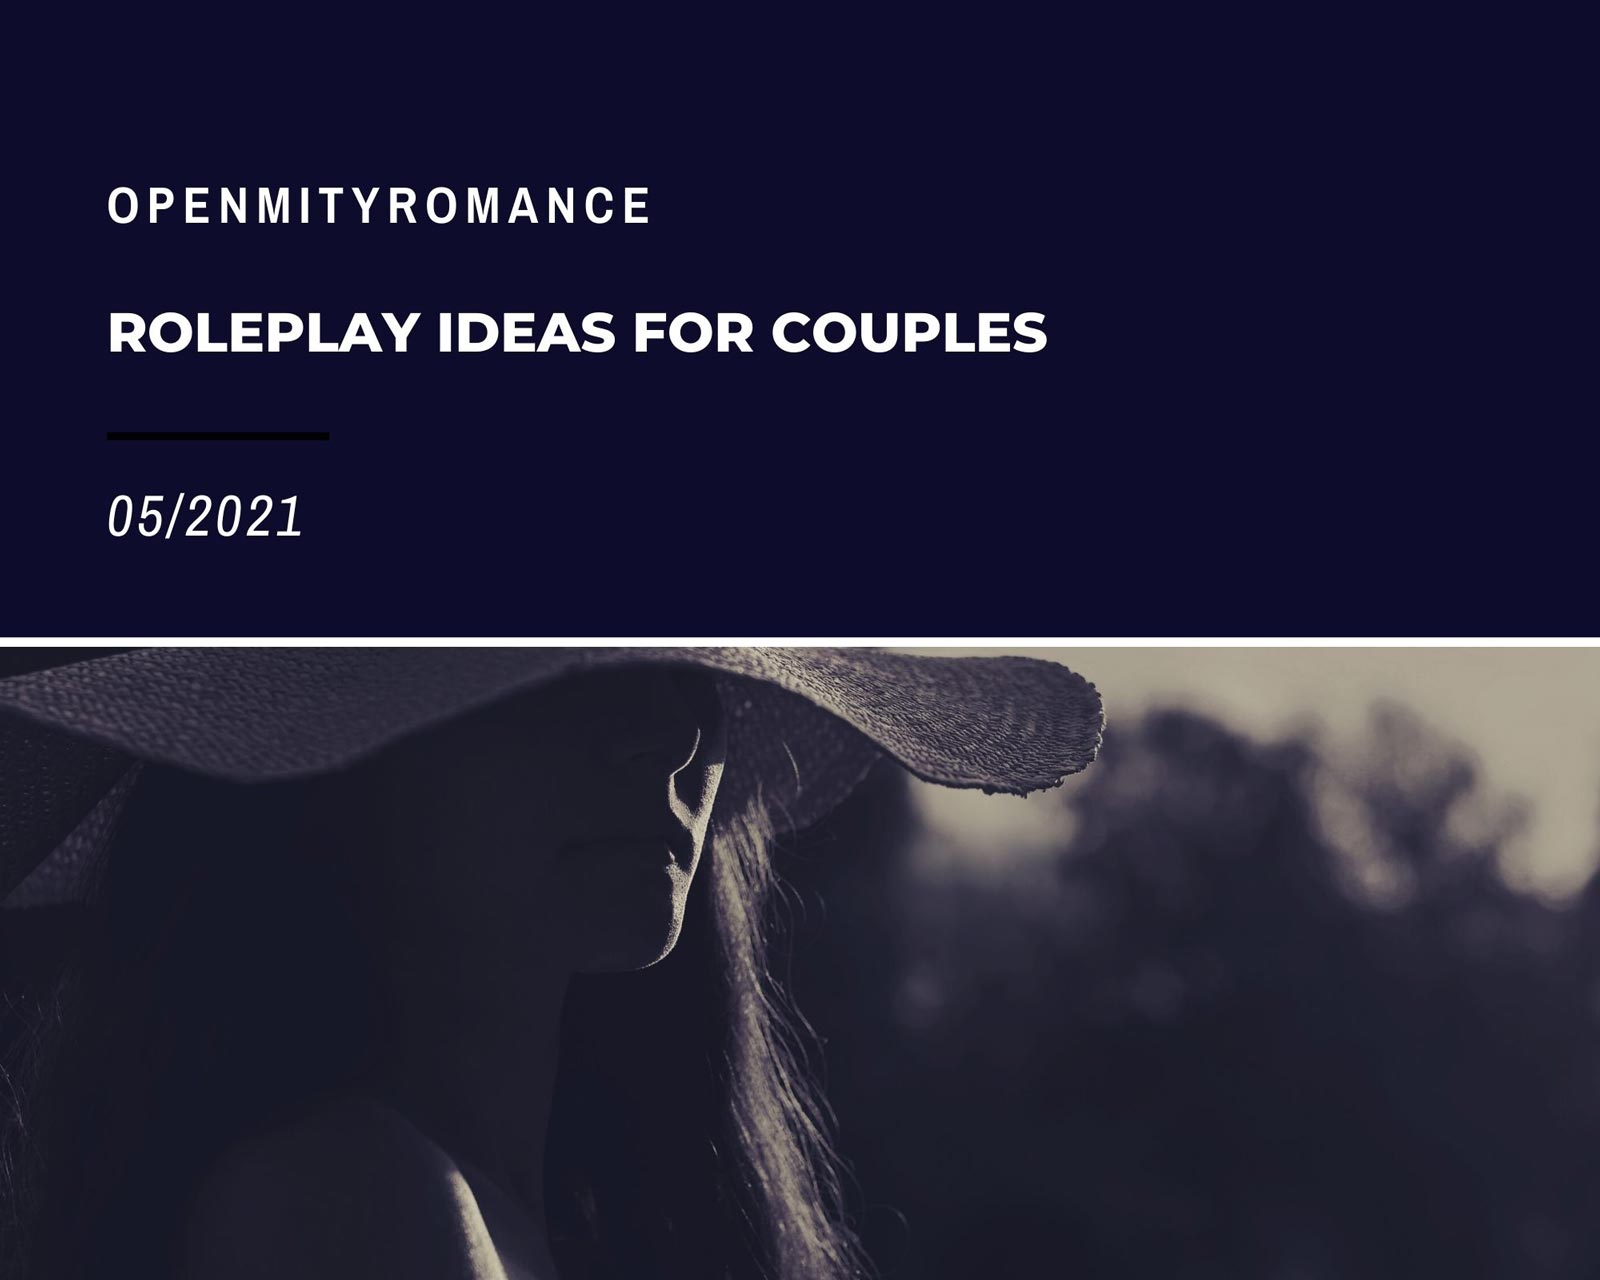 11 Roleplay Ideas for Couples - Beginners, Fun, Role Play Scenarios for Adults